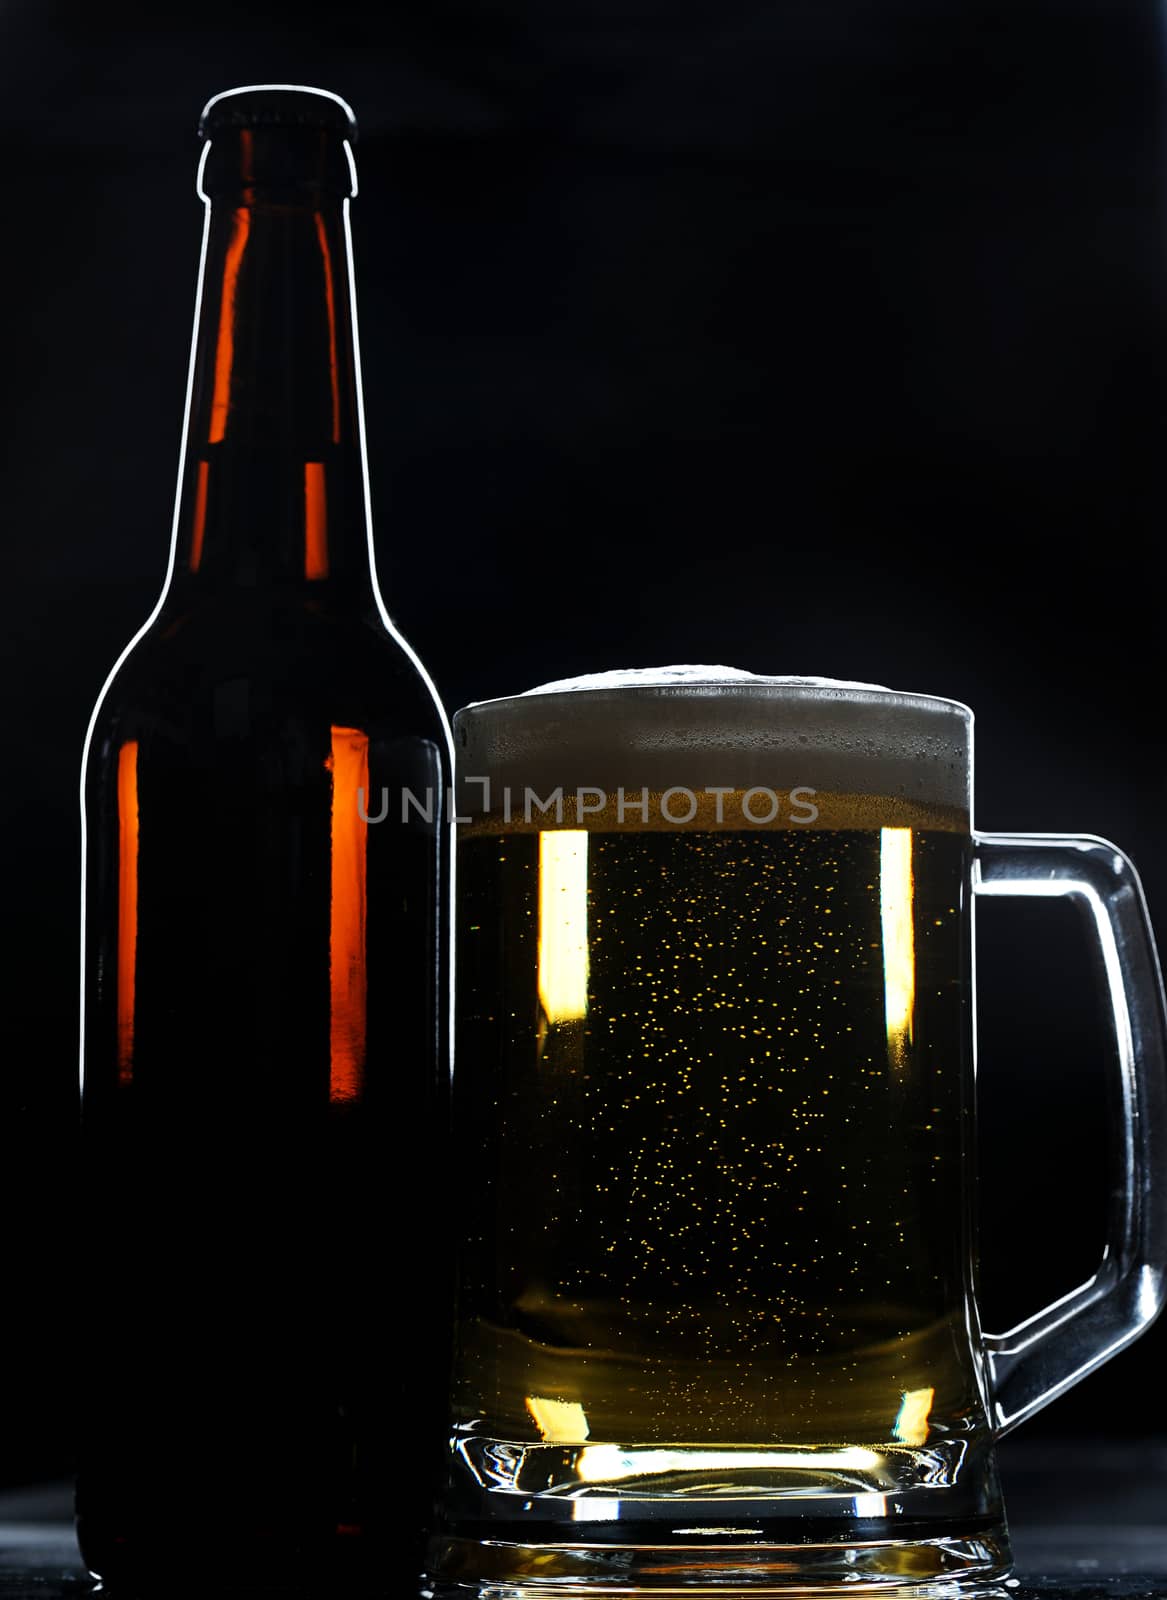 beer bottle and glass on black background